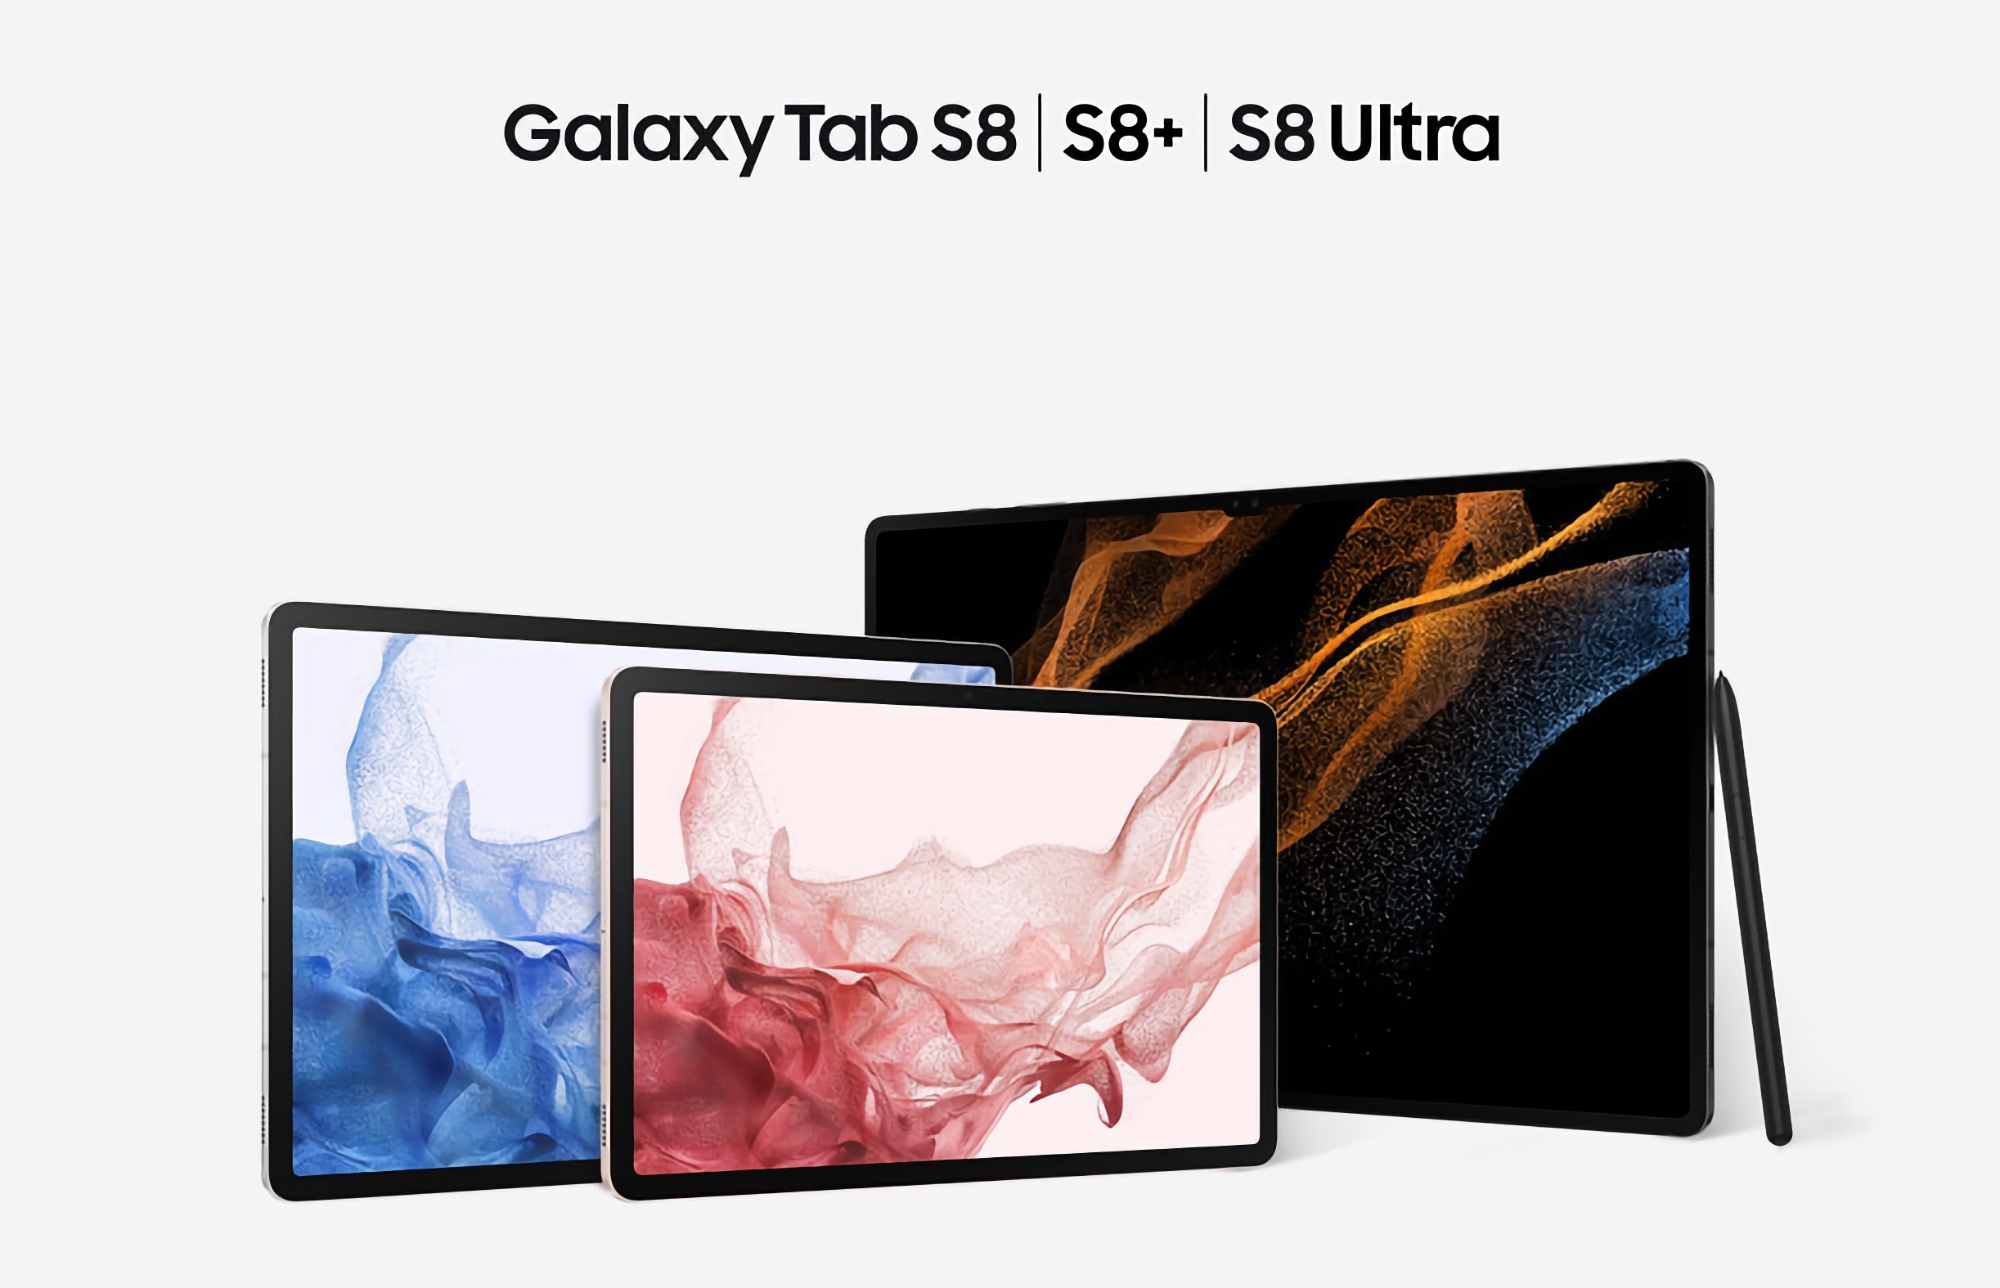 Samsung Galaxy Tab S8, Galaxy Tab S8+ and Galaxy Tab S8 Ultra began receiving the Android 12L update